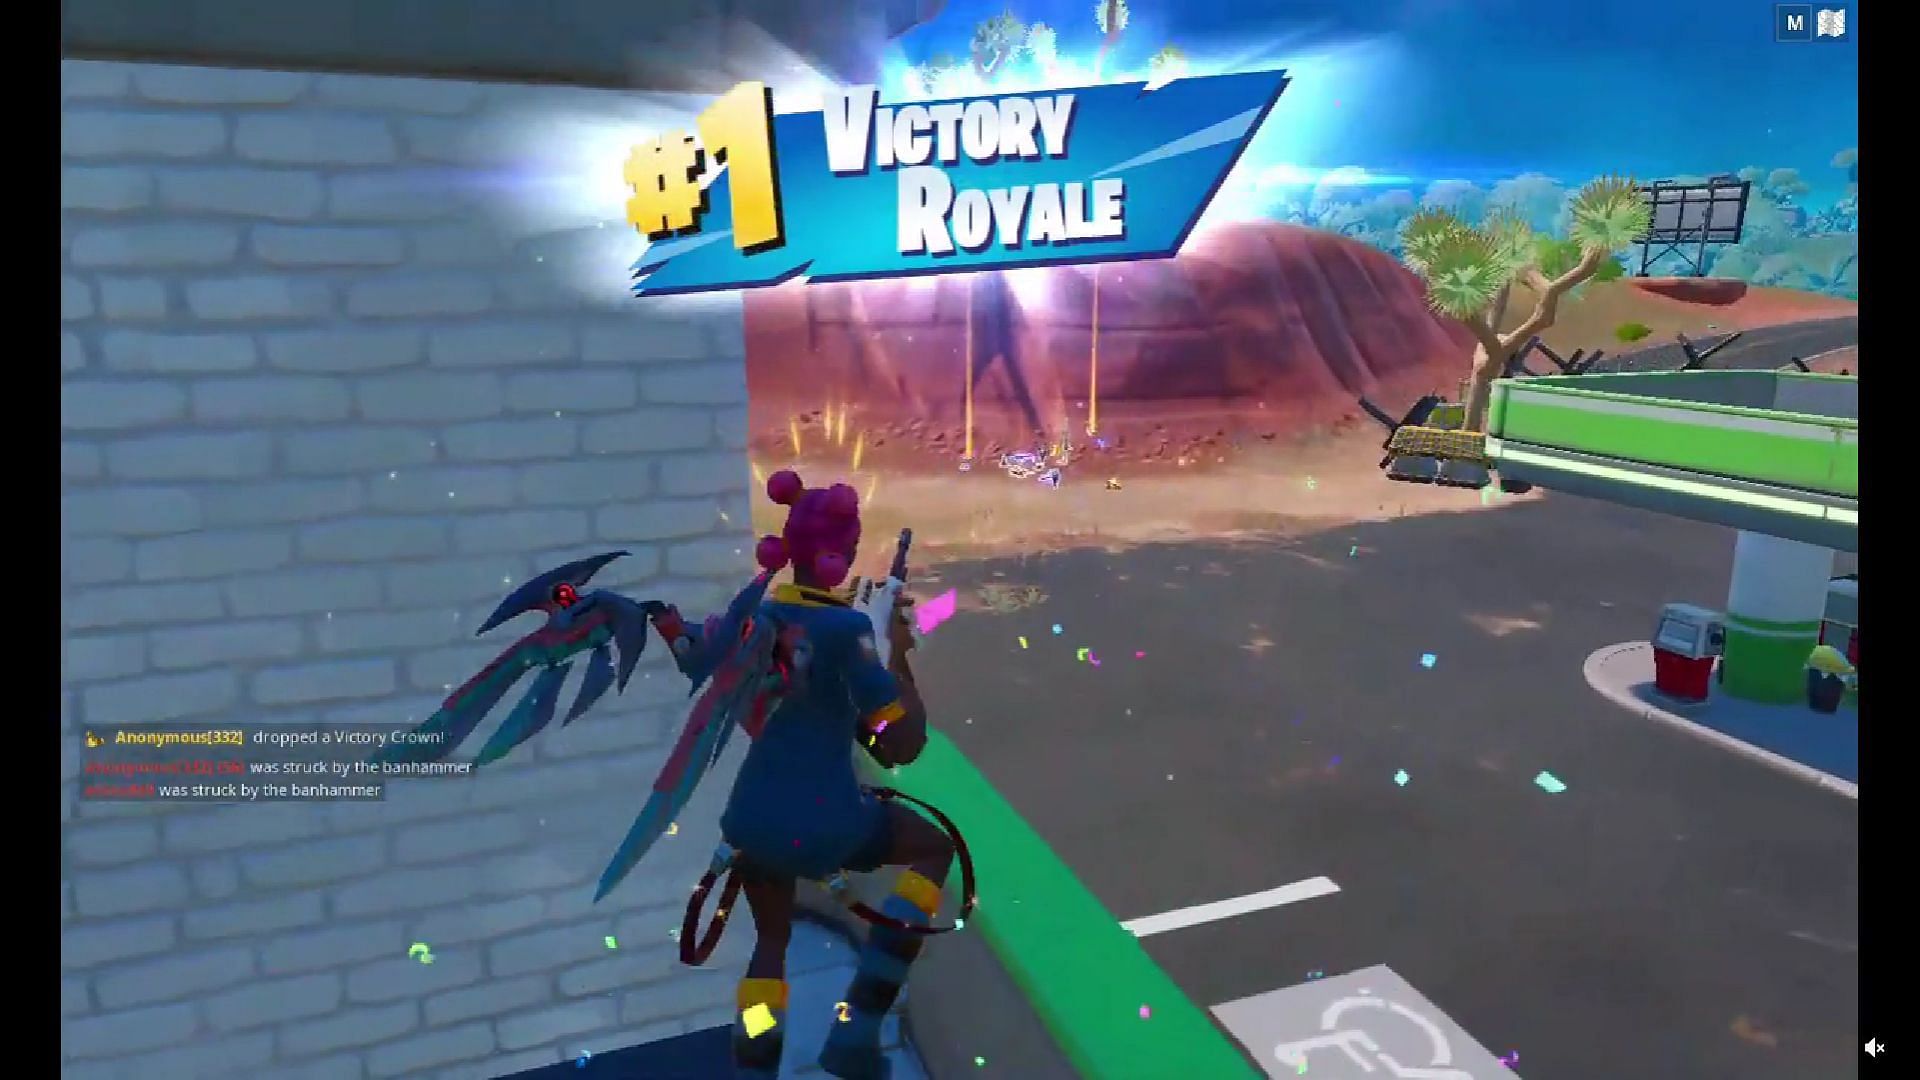 Reddit user theMightyPanda27 gets an unexpected Victory Royale (Image via u/theMightyPanda27/Reddit)